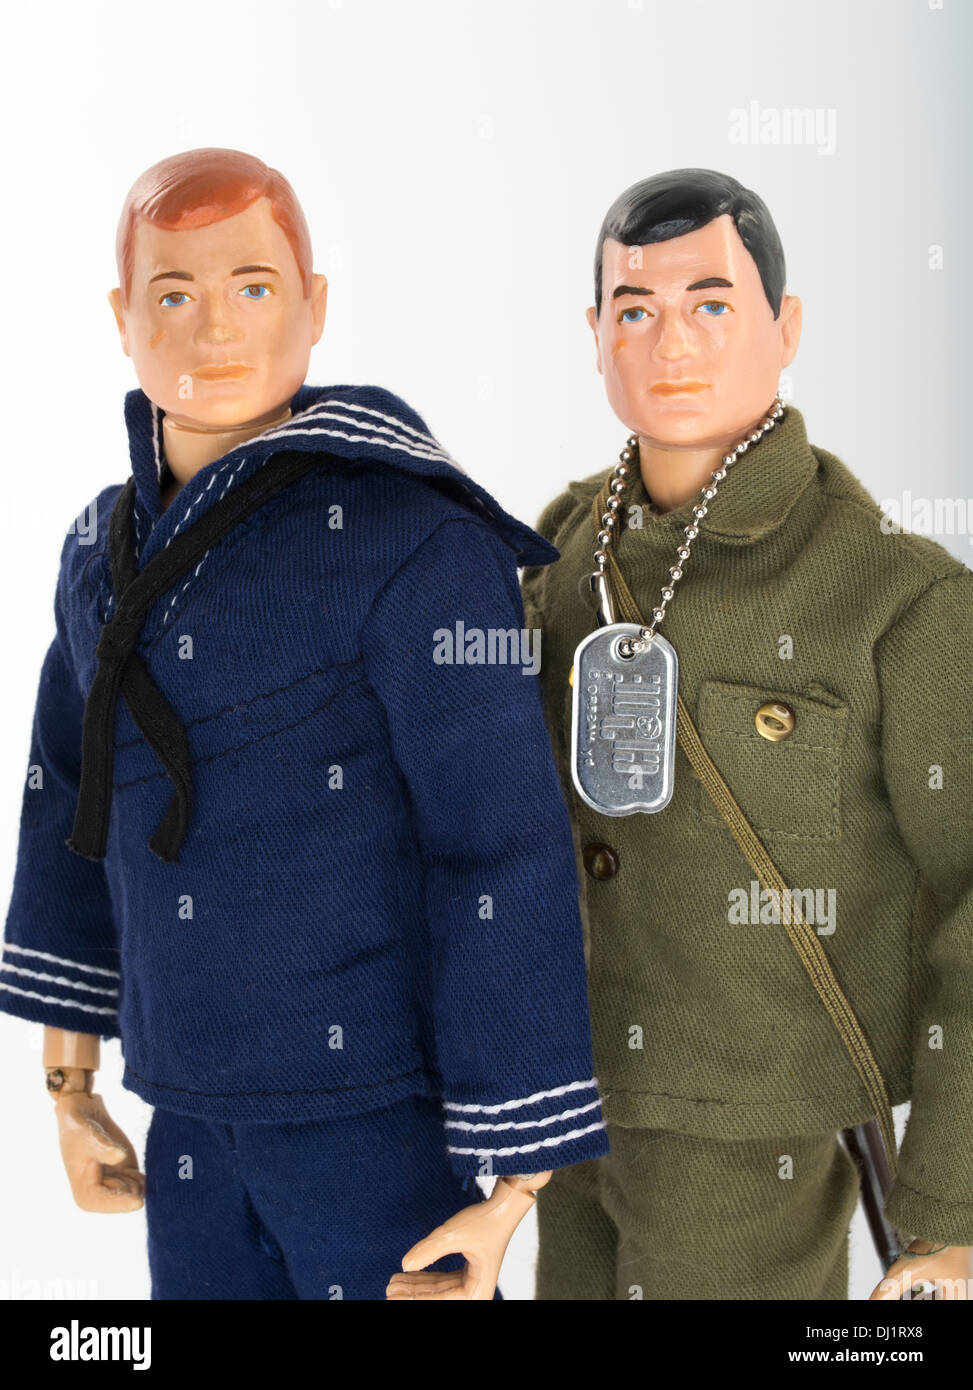 1964 GI Joe Action Figures by toy company Hasbro. U.S. Armed Forces Navy  with Army G.I Stock Photo - Alamy